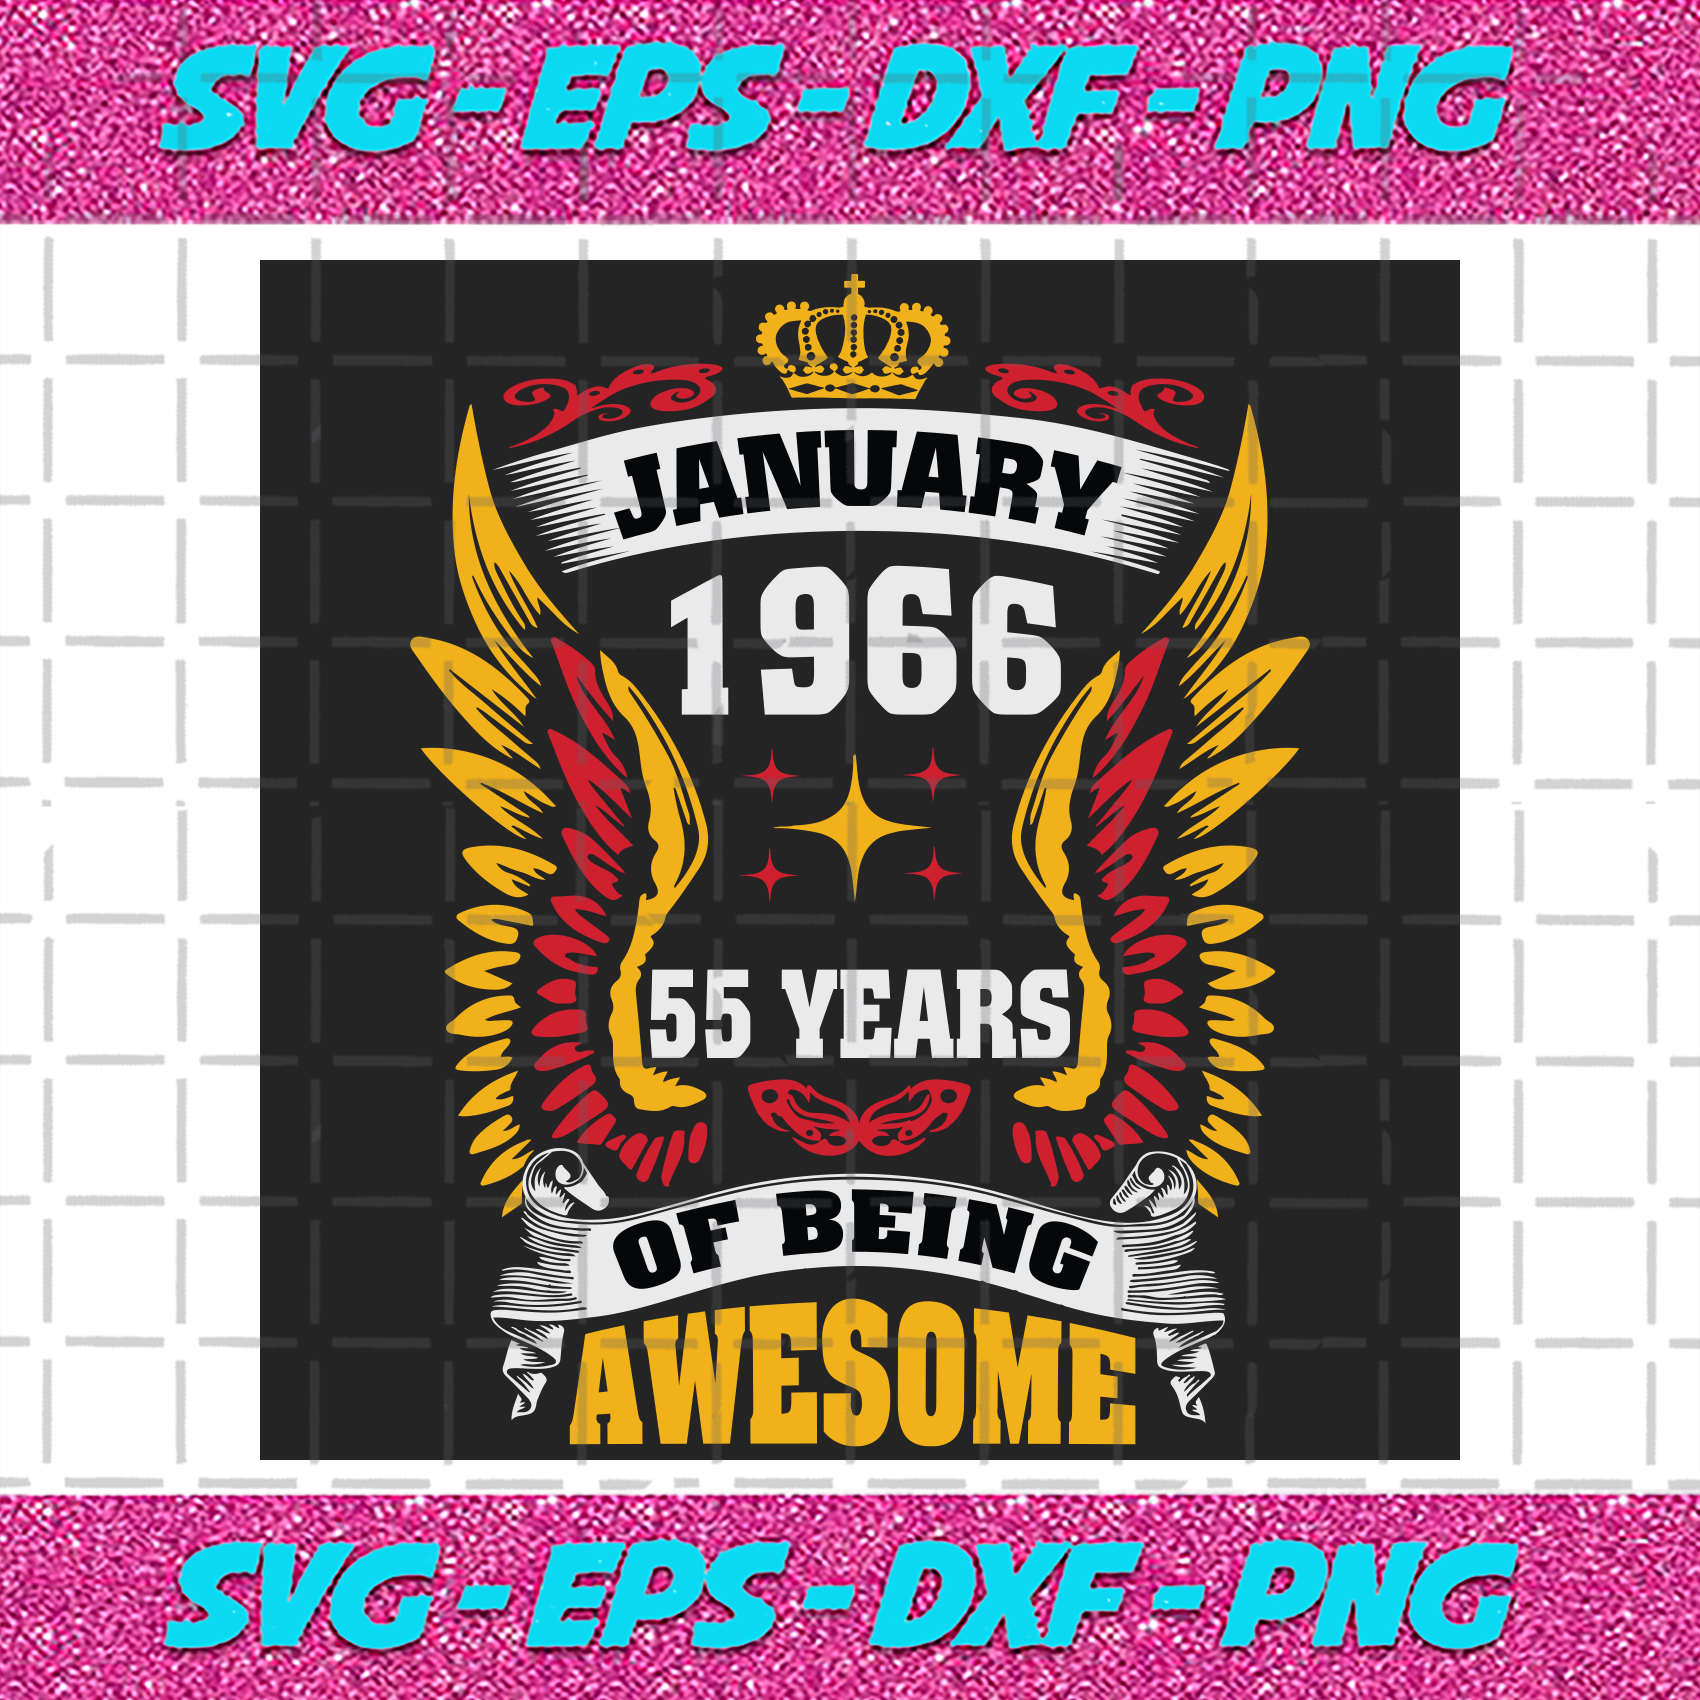 Download January 1966 55 Years Of Being Awesome Svg Birthday Svg January 1966 Svg 55 Years Svg January Birthday 1966 Birthday Svg Awesome 1966 Svg Born In 1966 Born In January 55 Years Old Trendiessvg Com